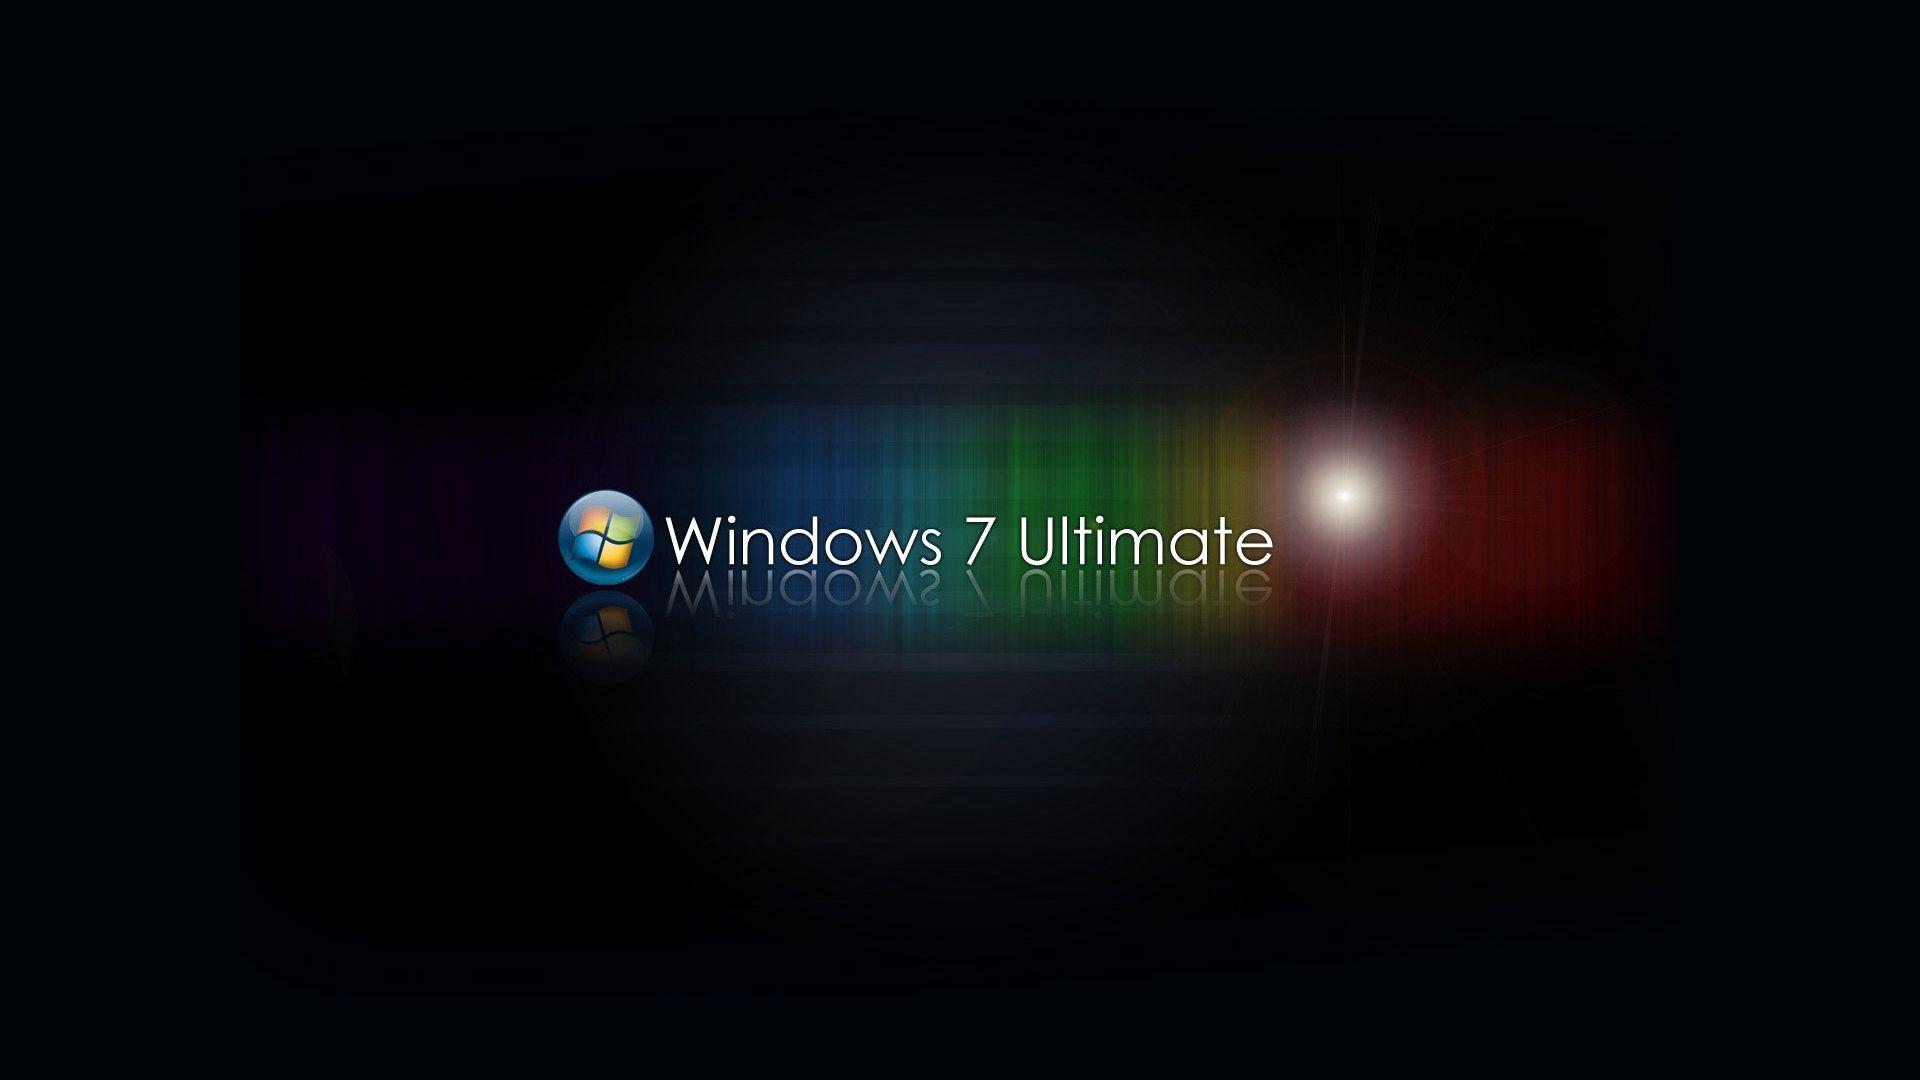 Download wallpaper 1920x1080 windows 7 ultimate, ultimate, red